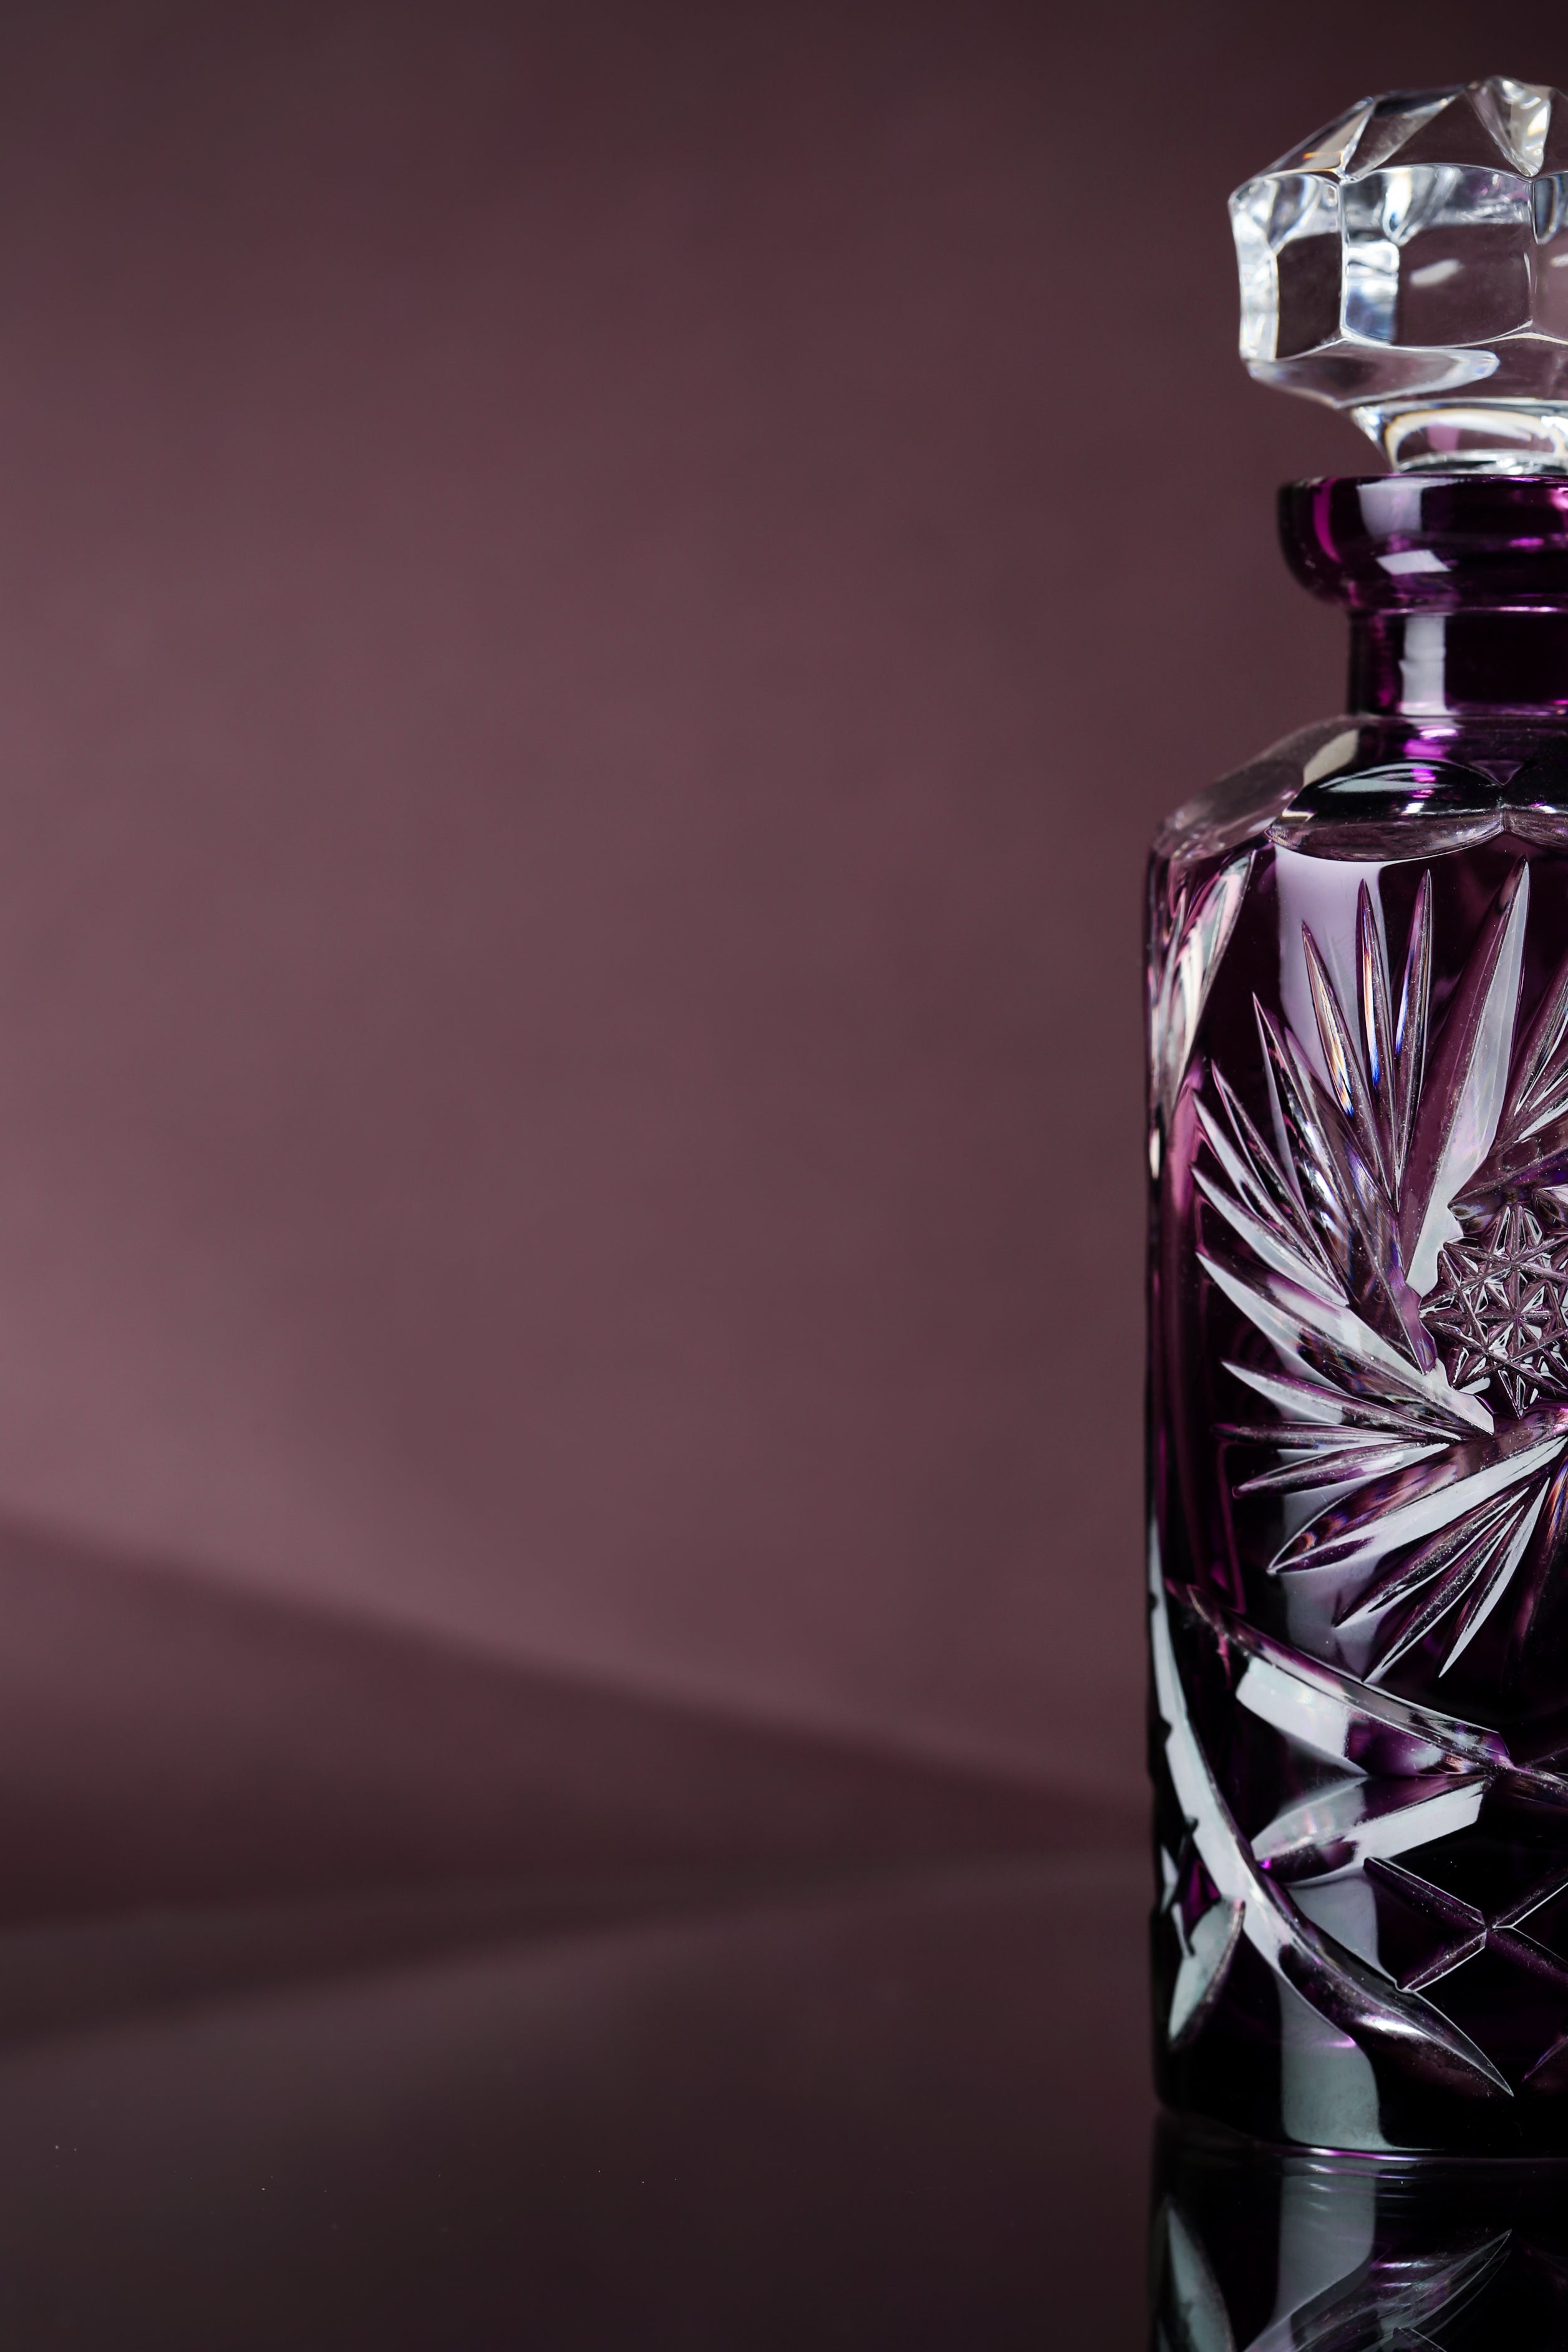 CAESAR CRYSTAL BOHEMIAE - Periwinkle Touch – Pretty & Perfect Refillable Perfume Glass Bottle.